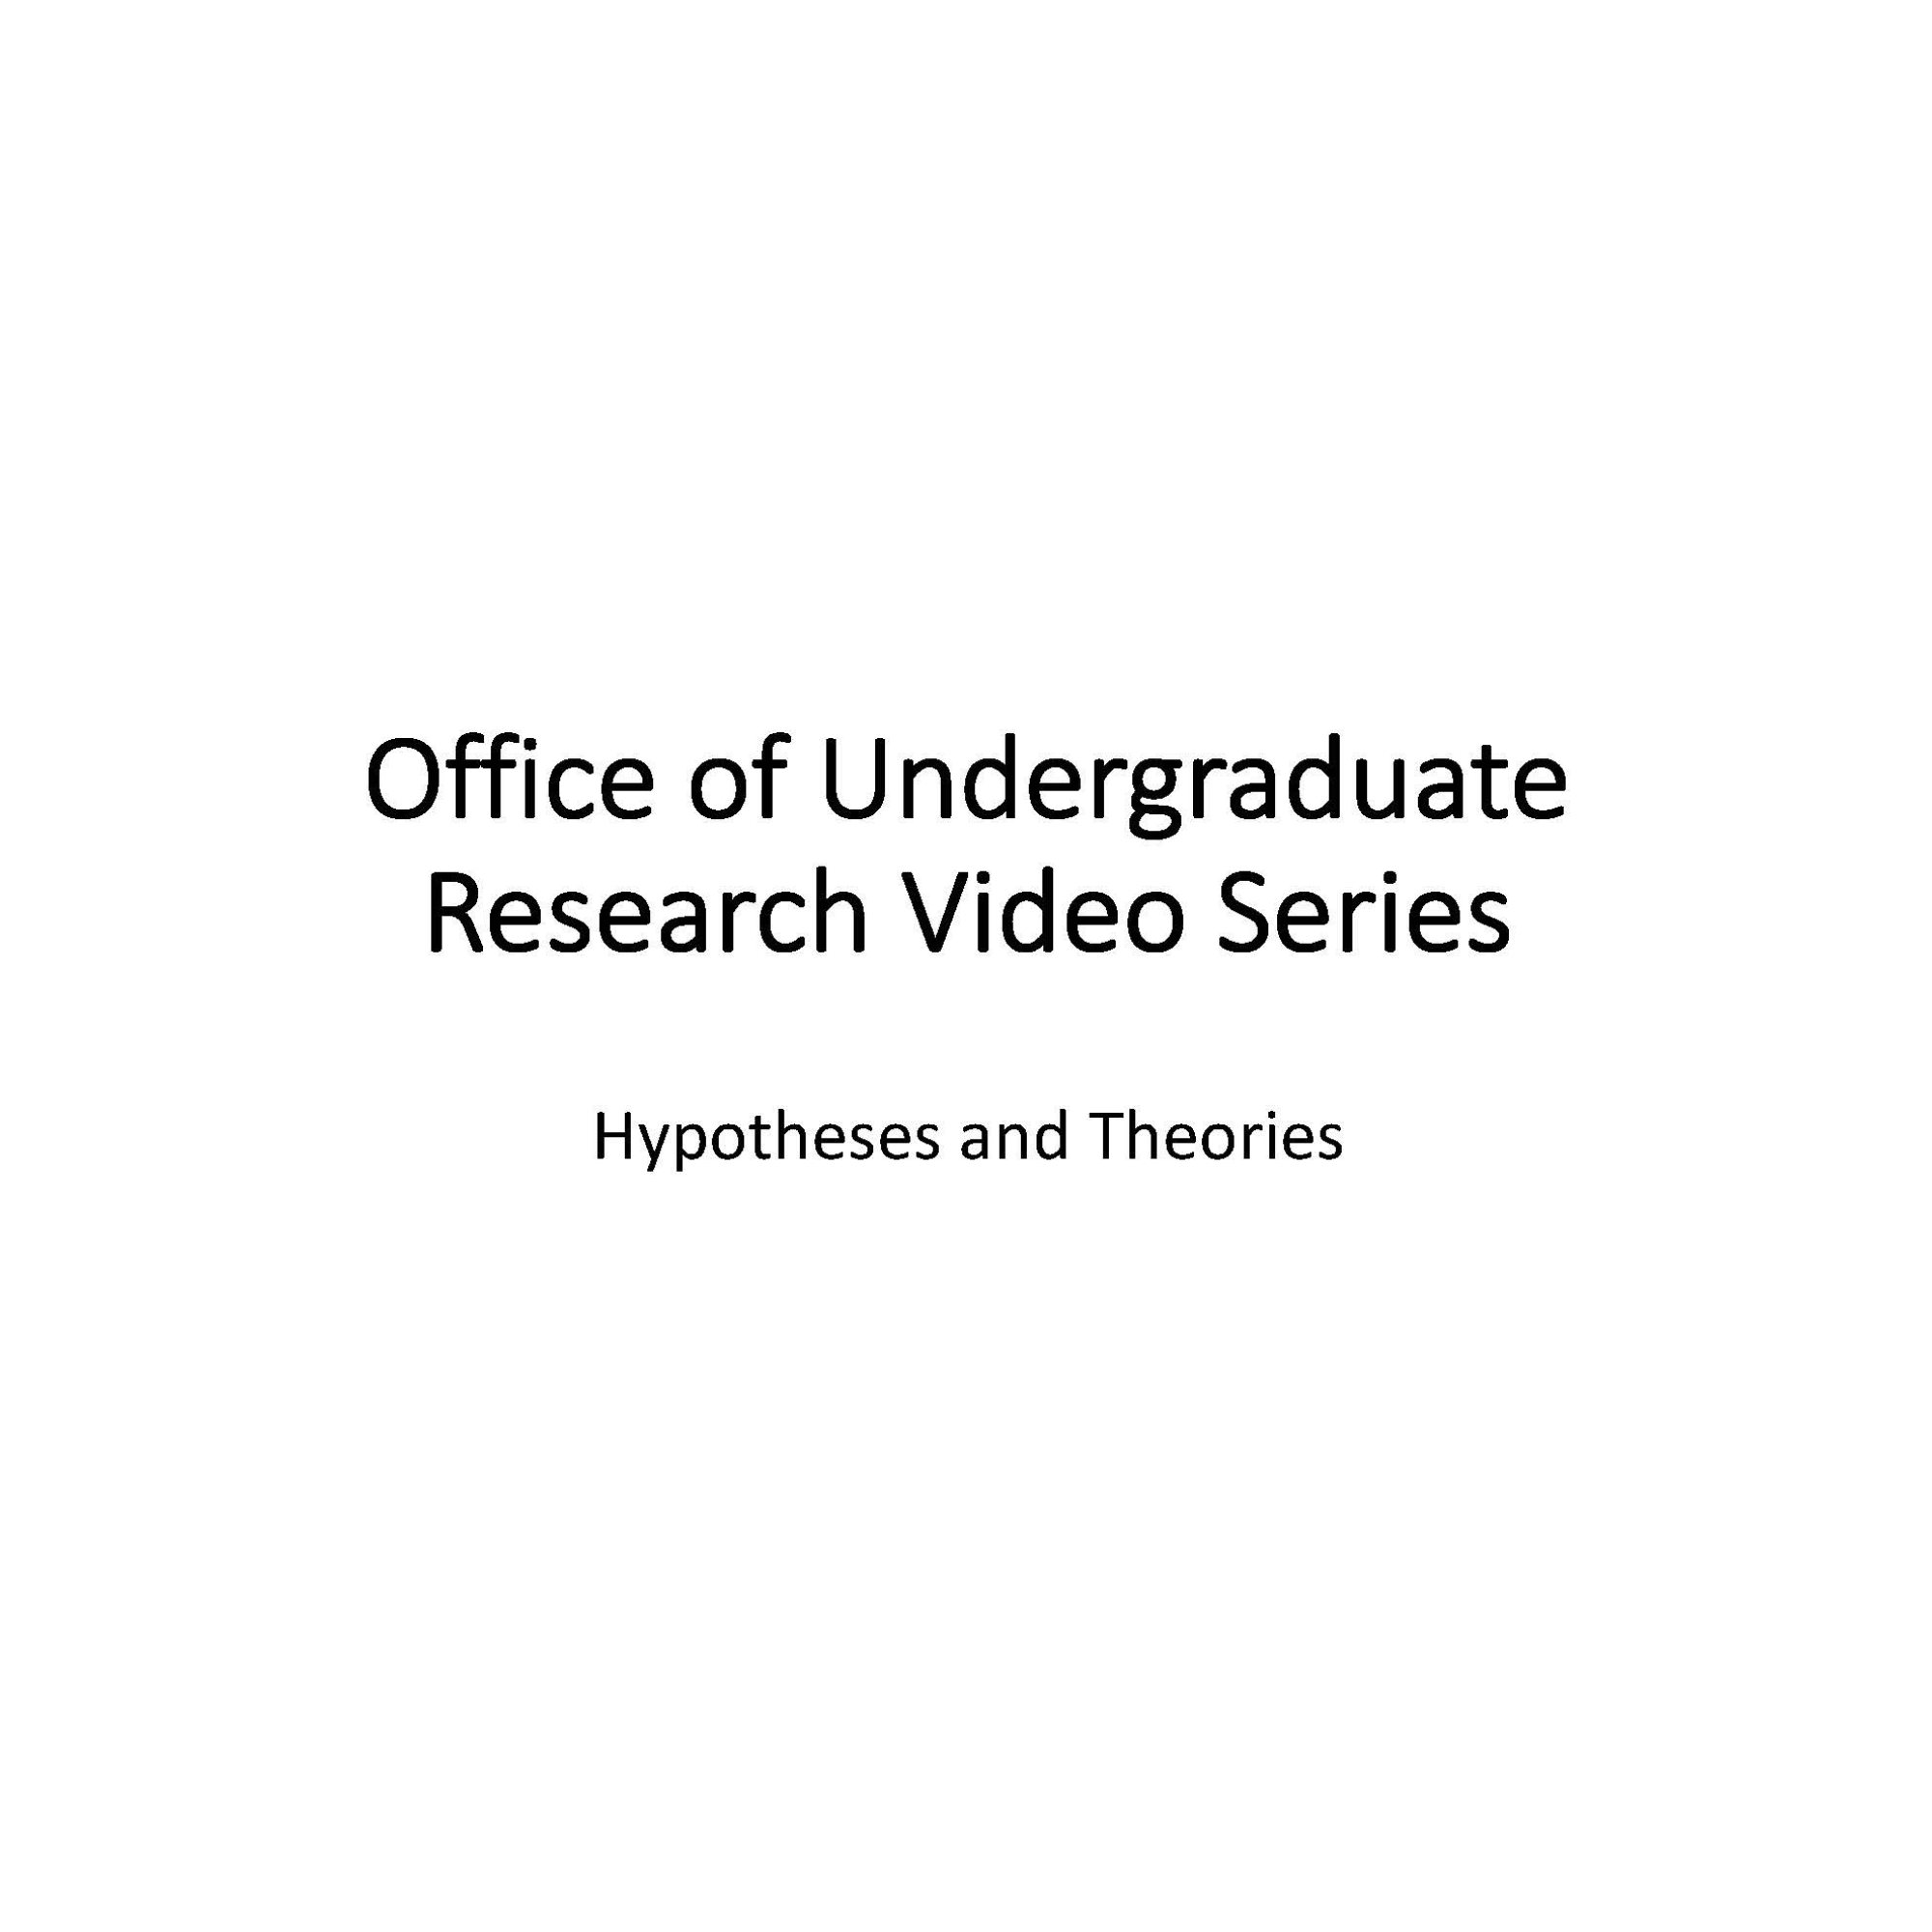 hypotheses-and-theories